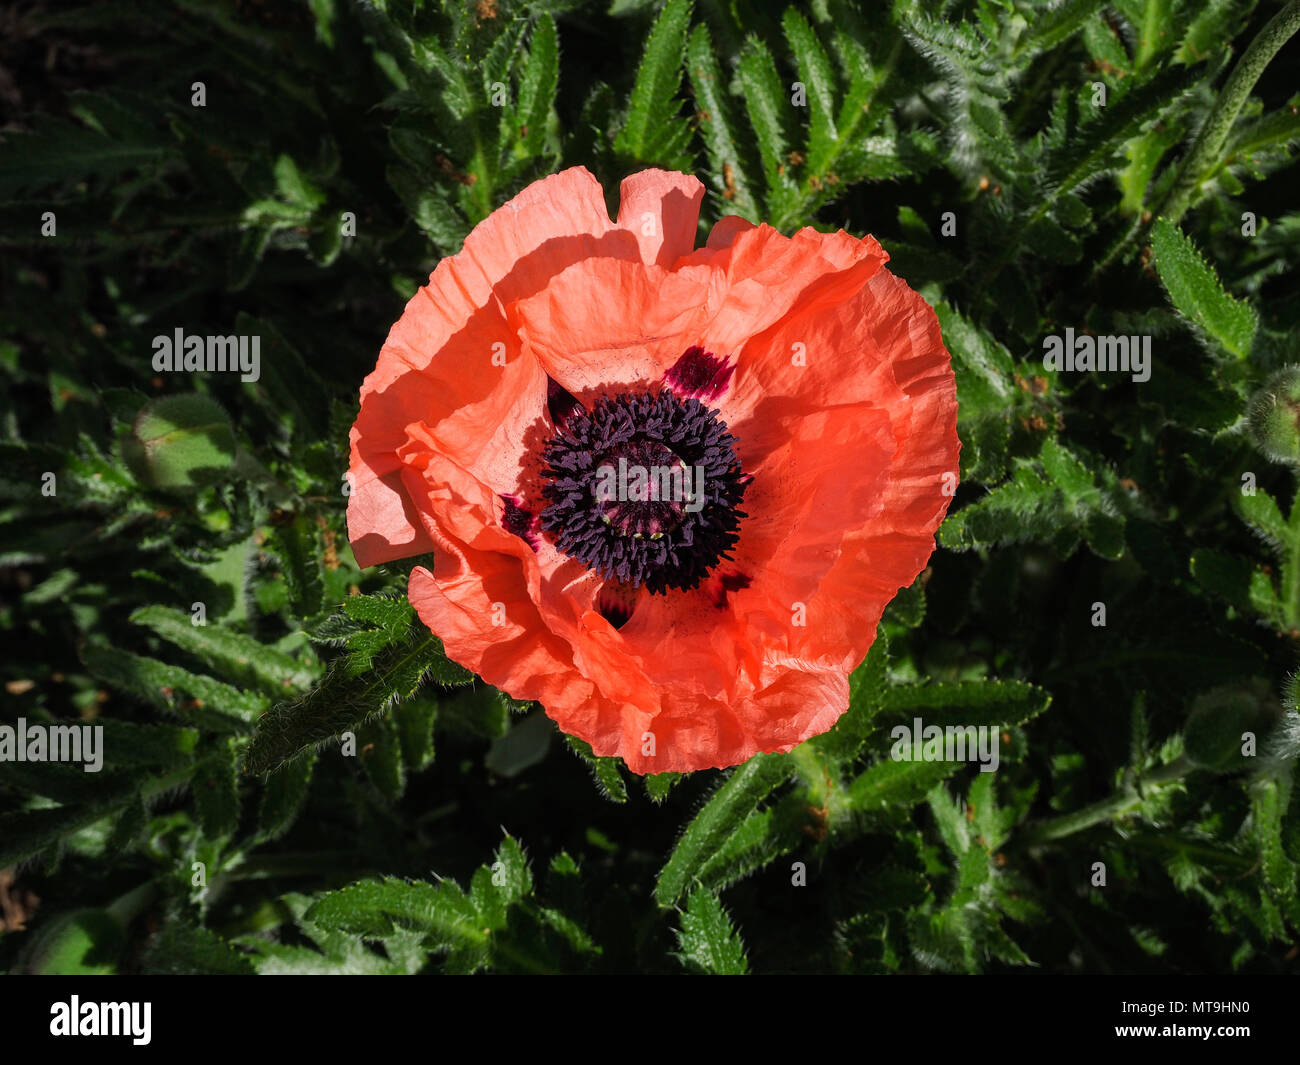 A close up of a single flower of the Poppy Fruit Puch Stock Photo